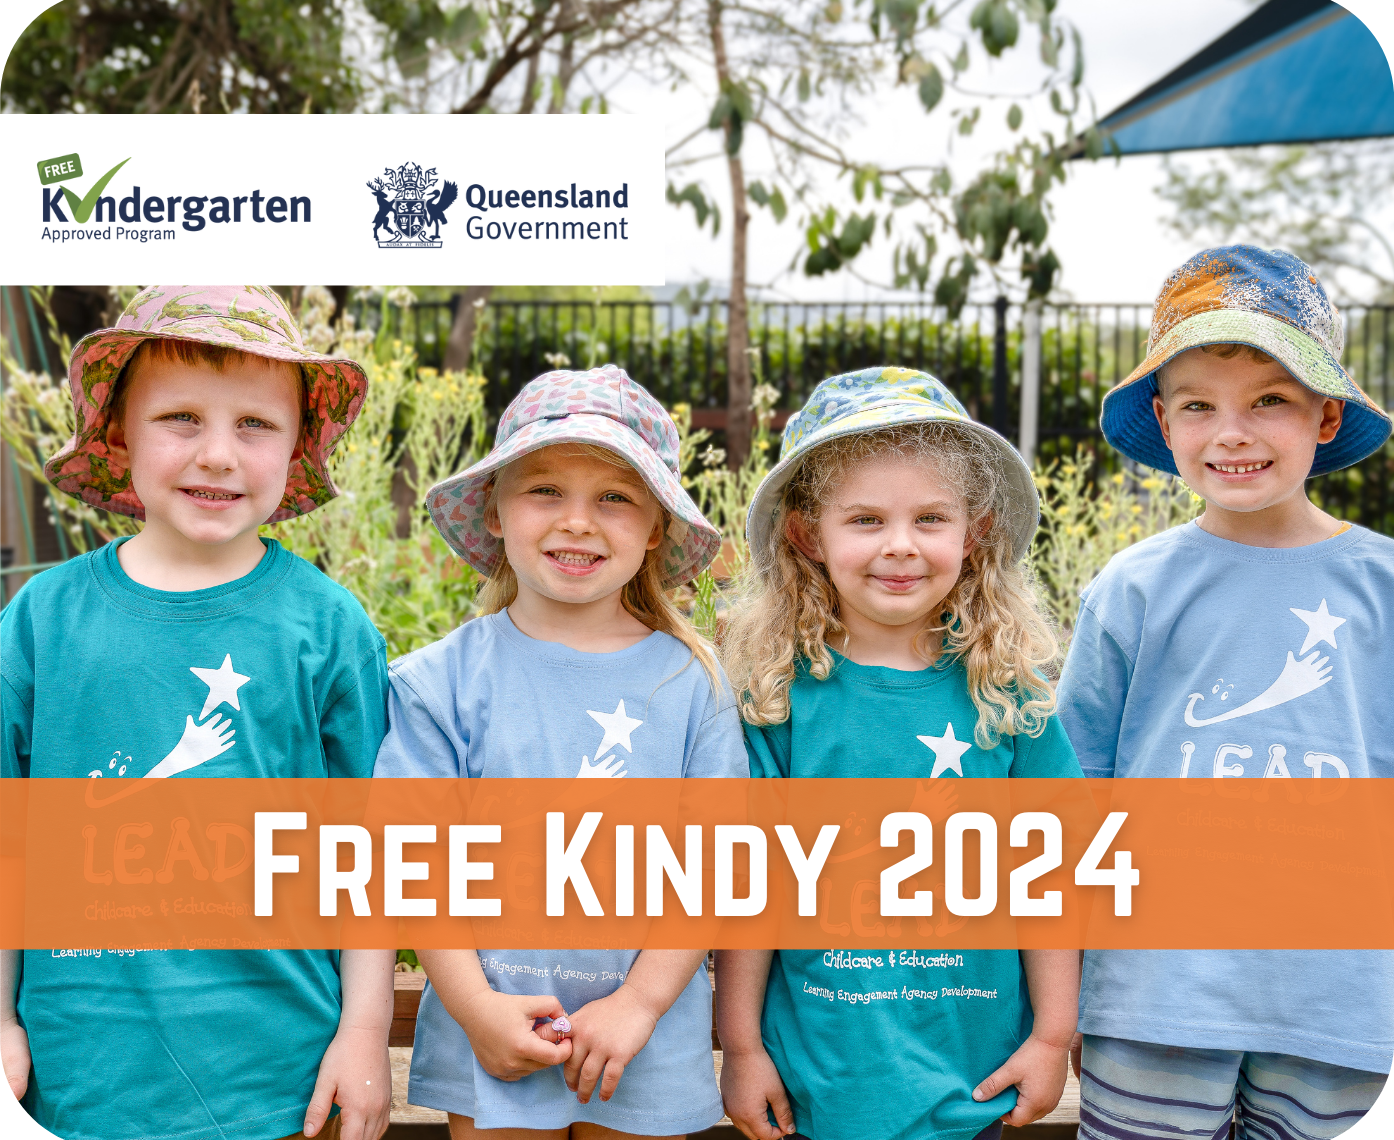 FREE Kindy for all!